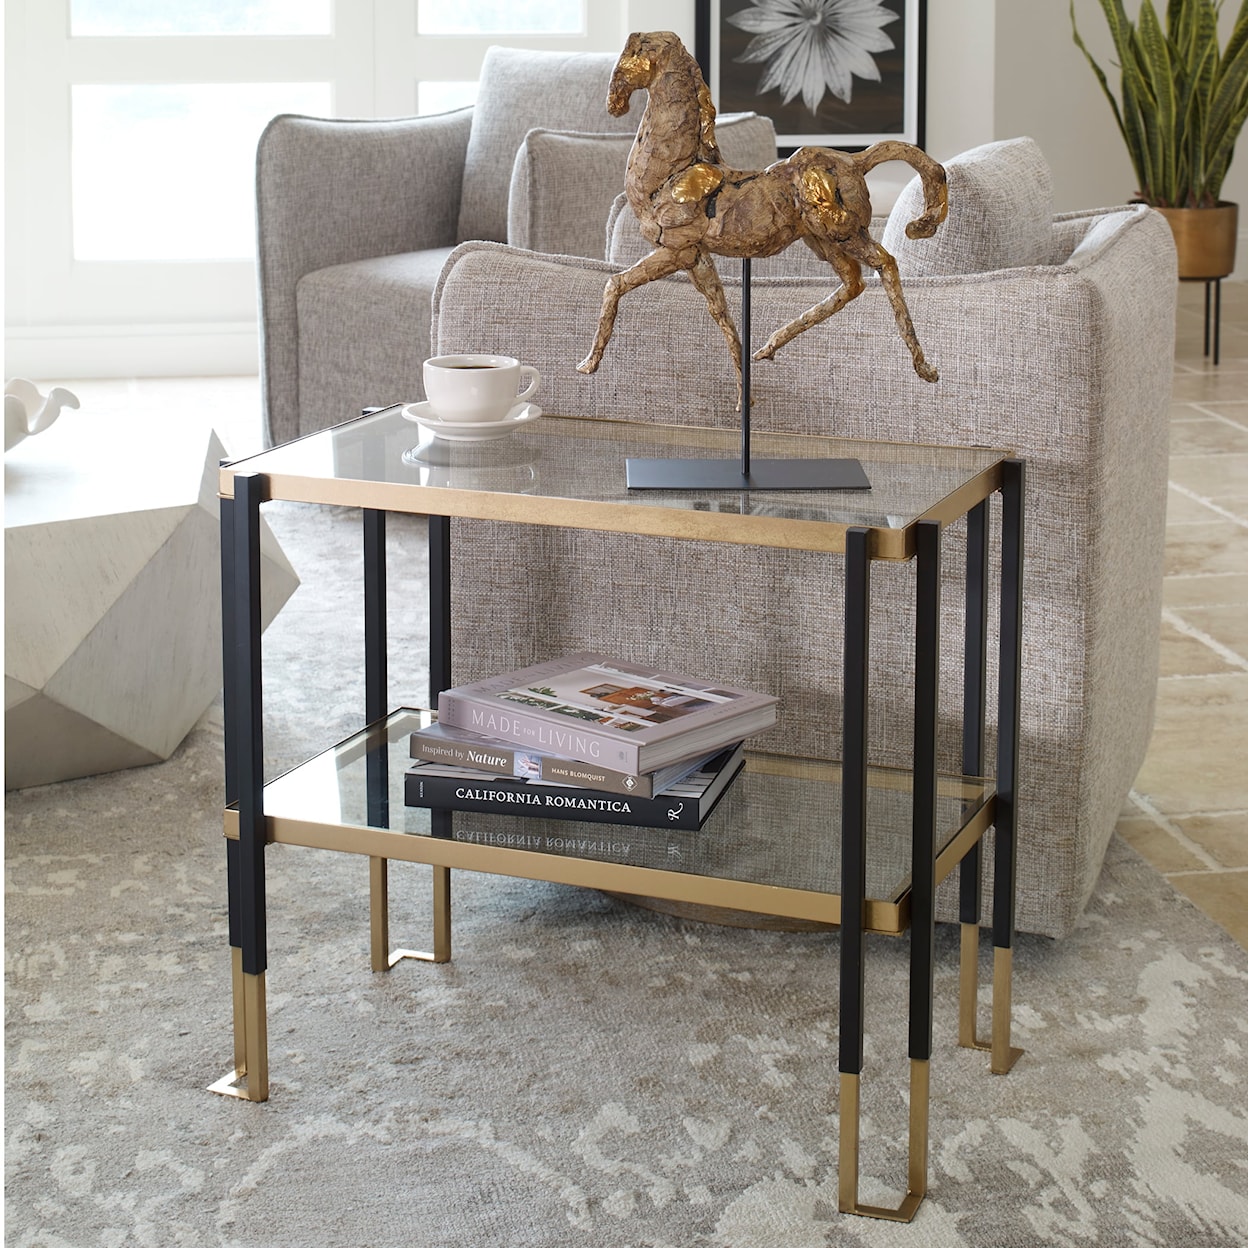 Uttermost Accent Furniture Kentmore Glass Side Table